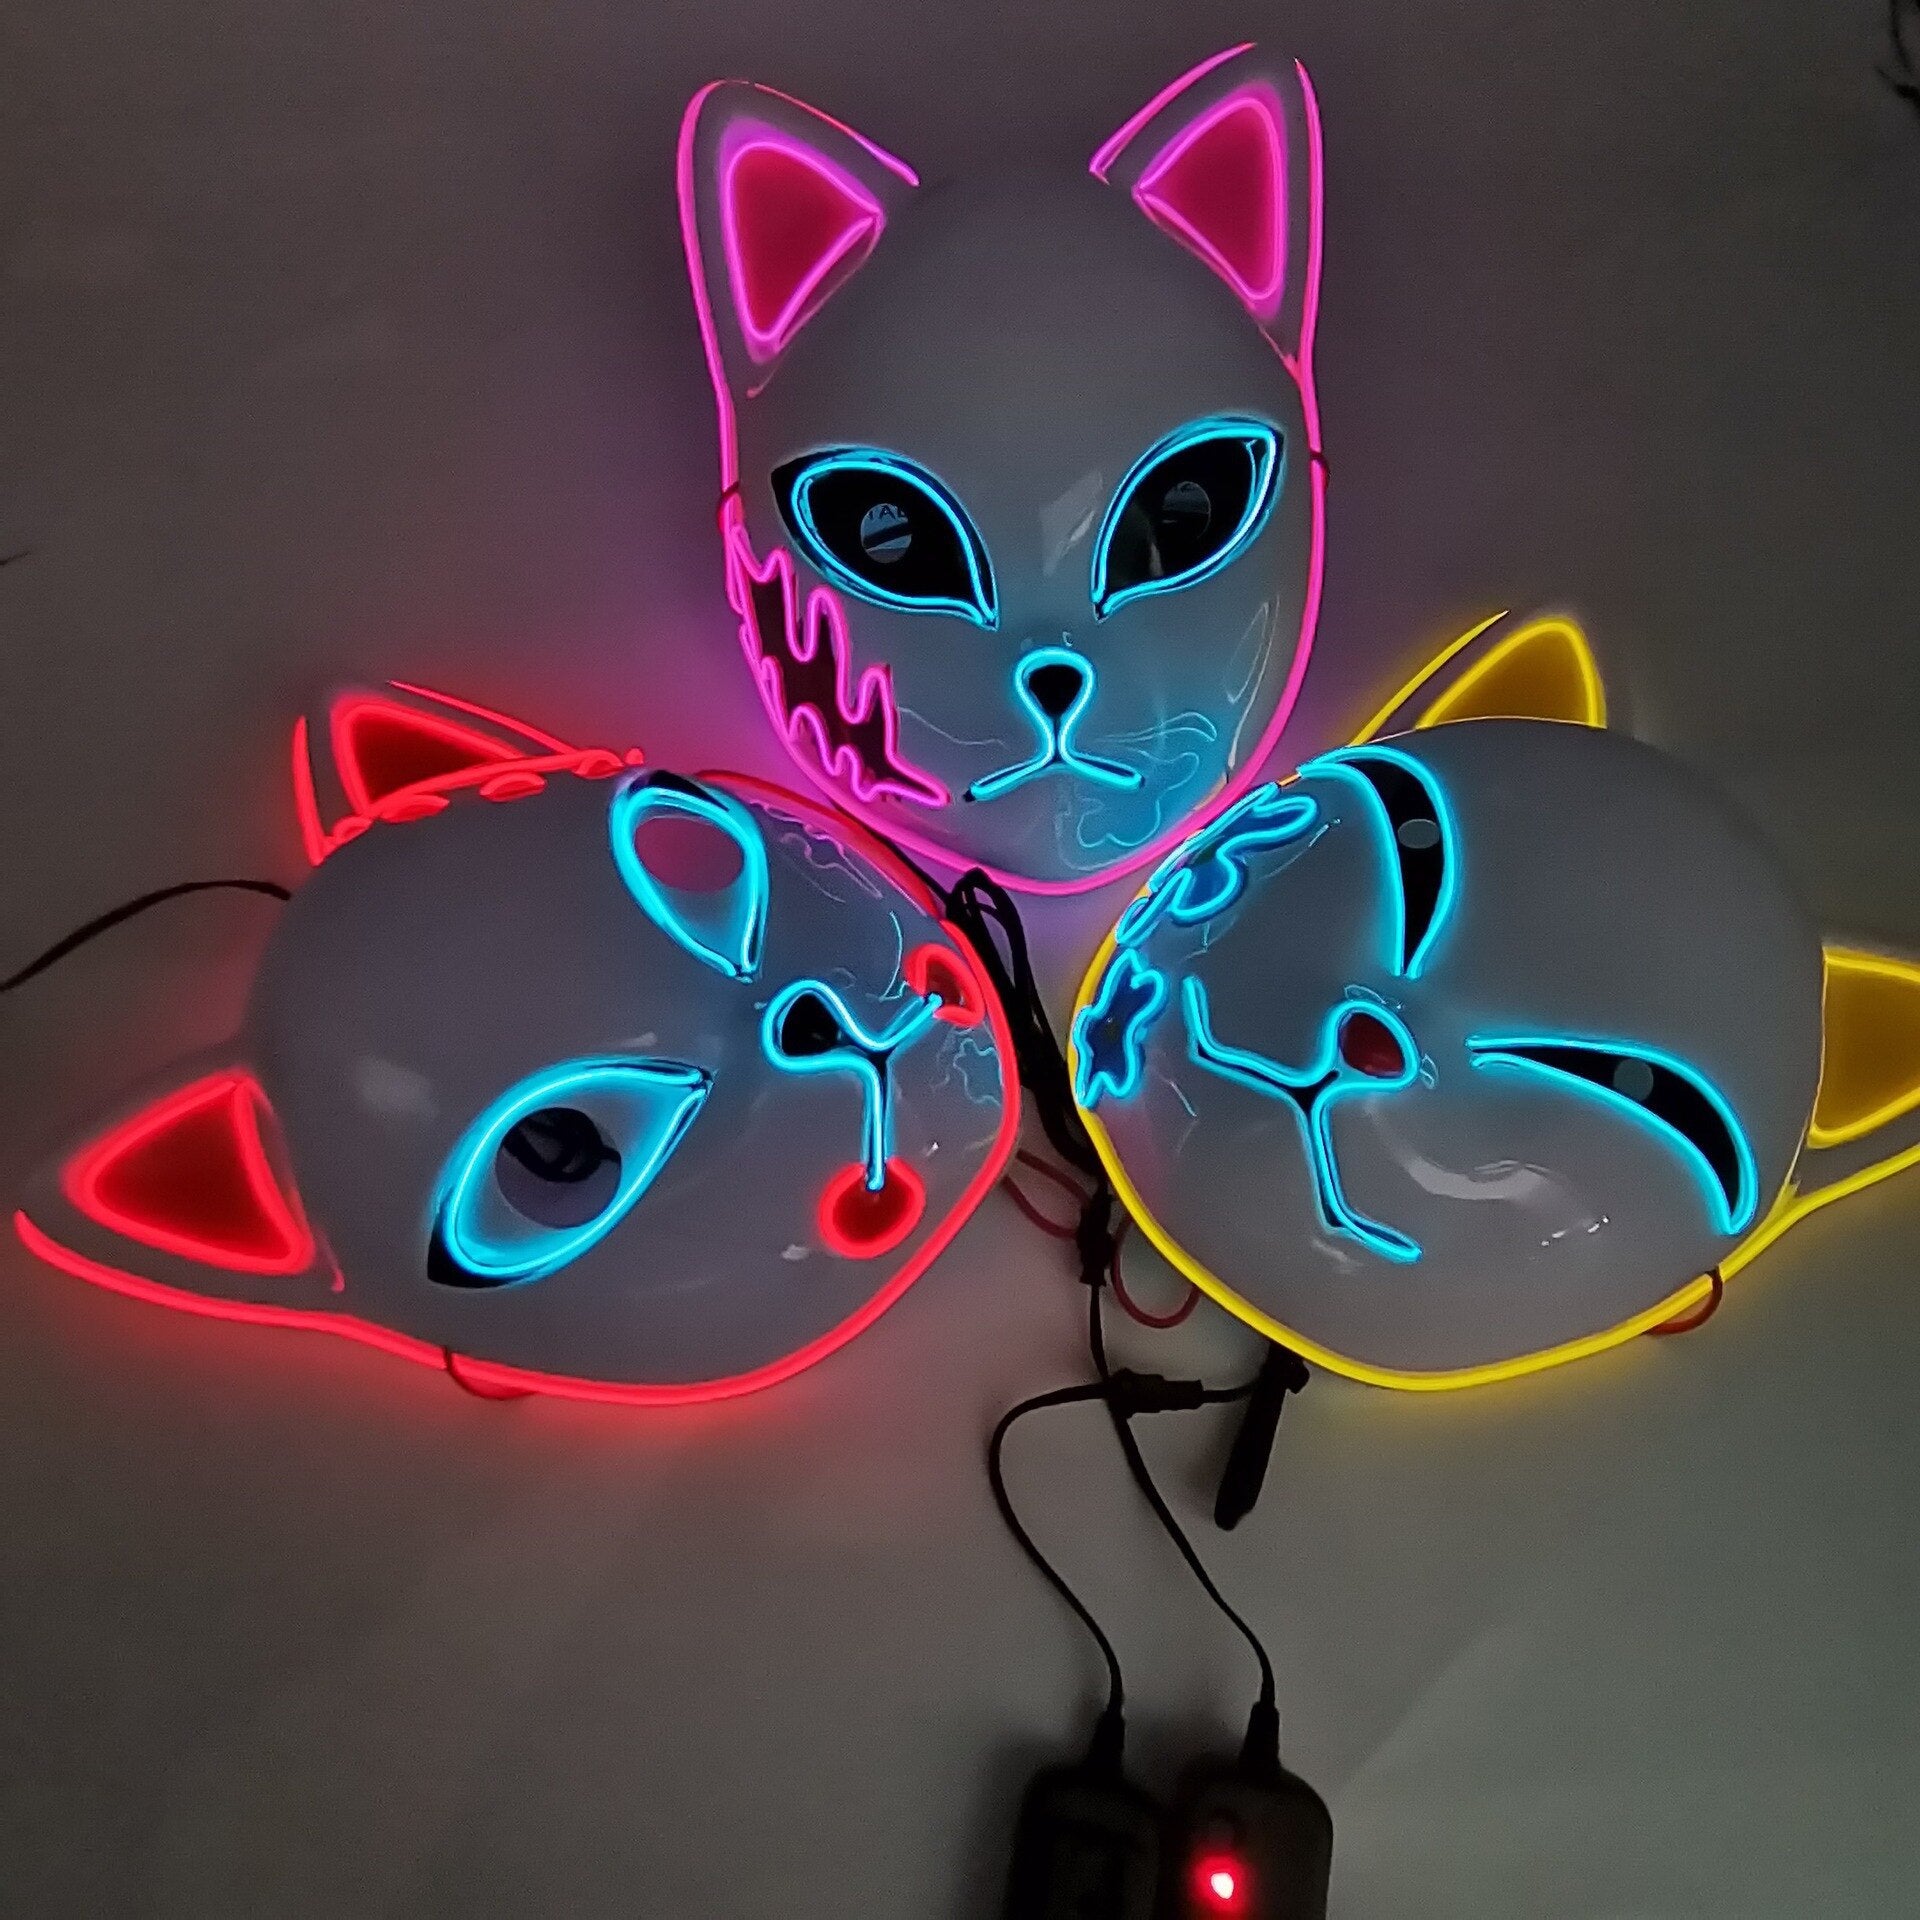 A dark setting showcasing three Anime Style Cat Masks illuminated with different neon LED colors, highlighting the masks' vibrant glow-in-the-dark feature.